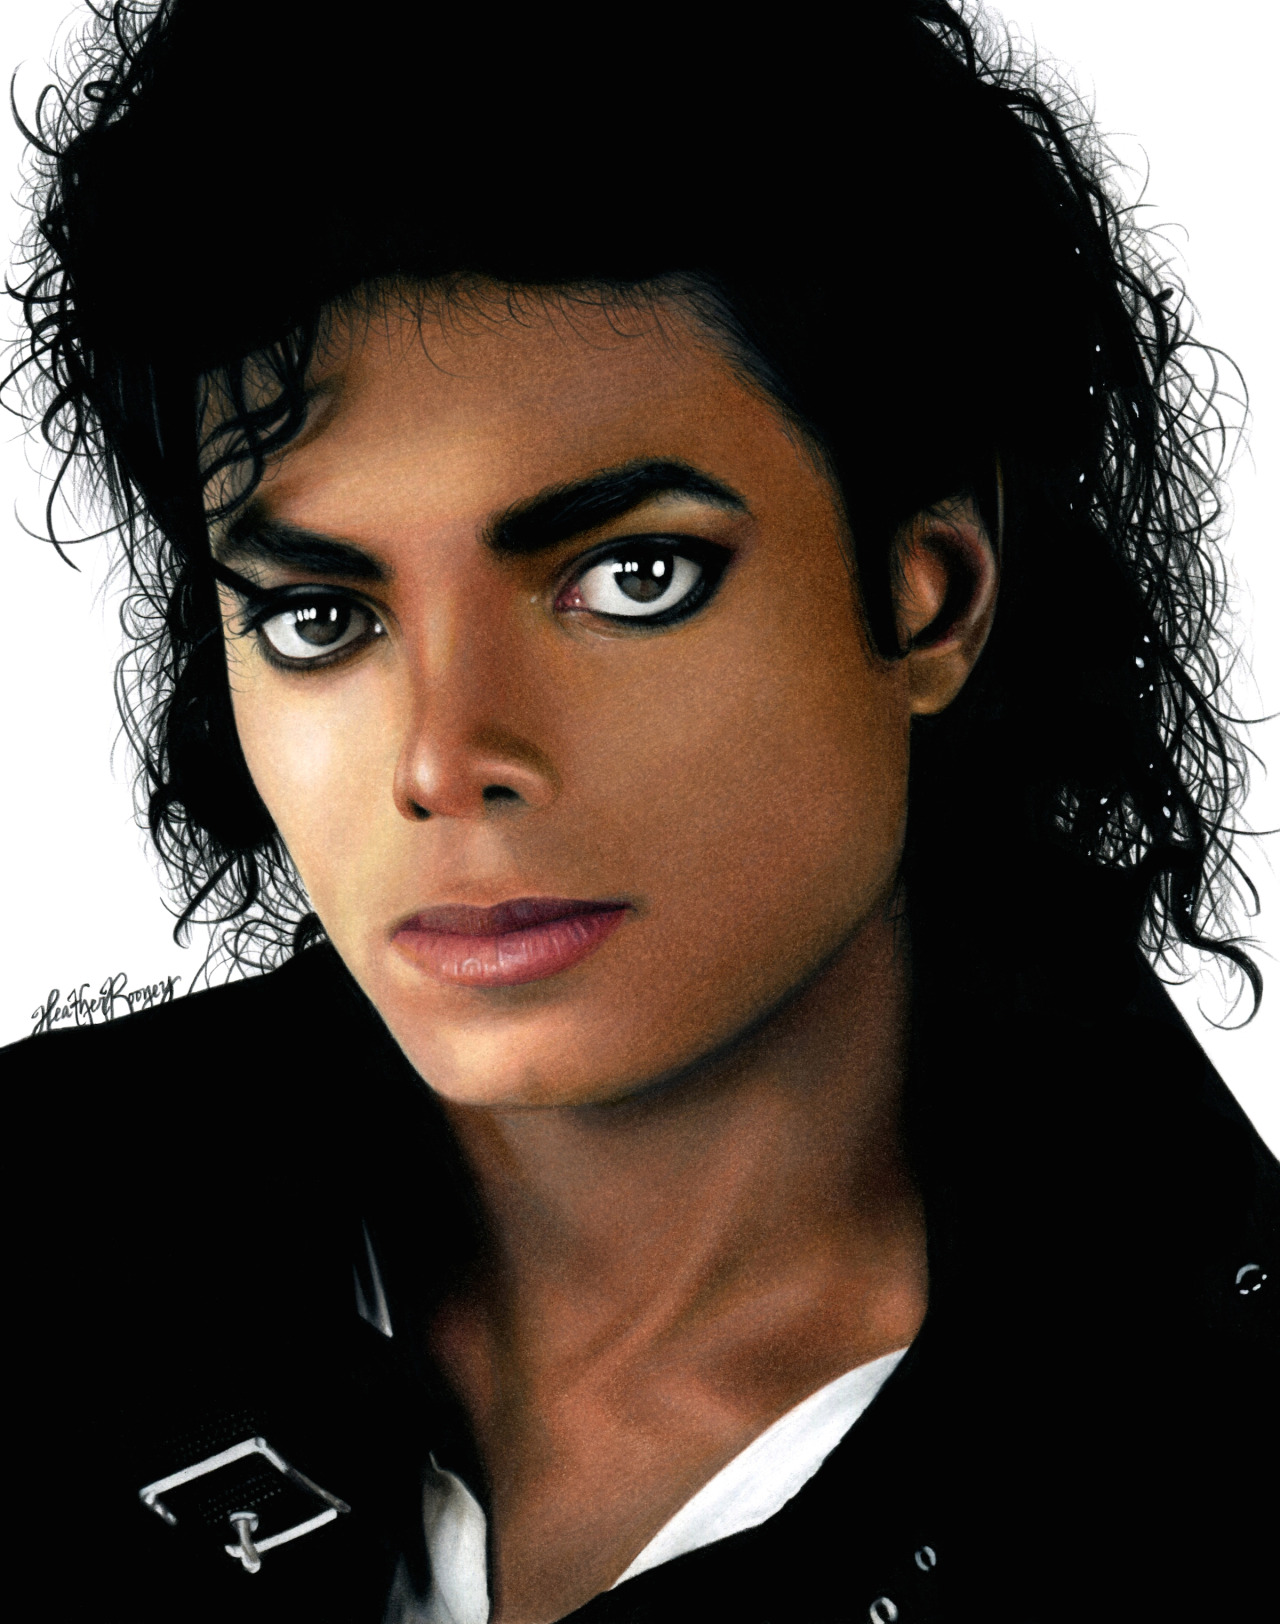 How to Draw the face of Michael Jackson with pencil « Drawing &  Illustration :: WonderHowTo